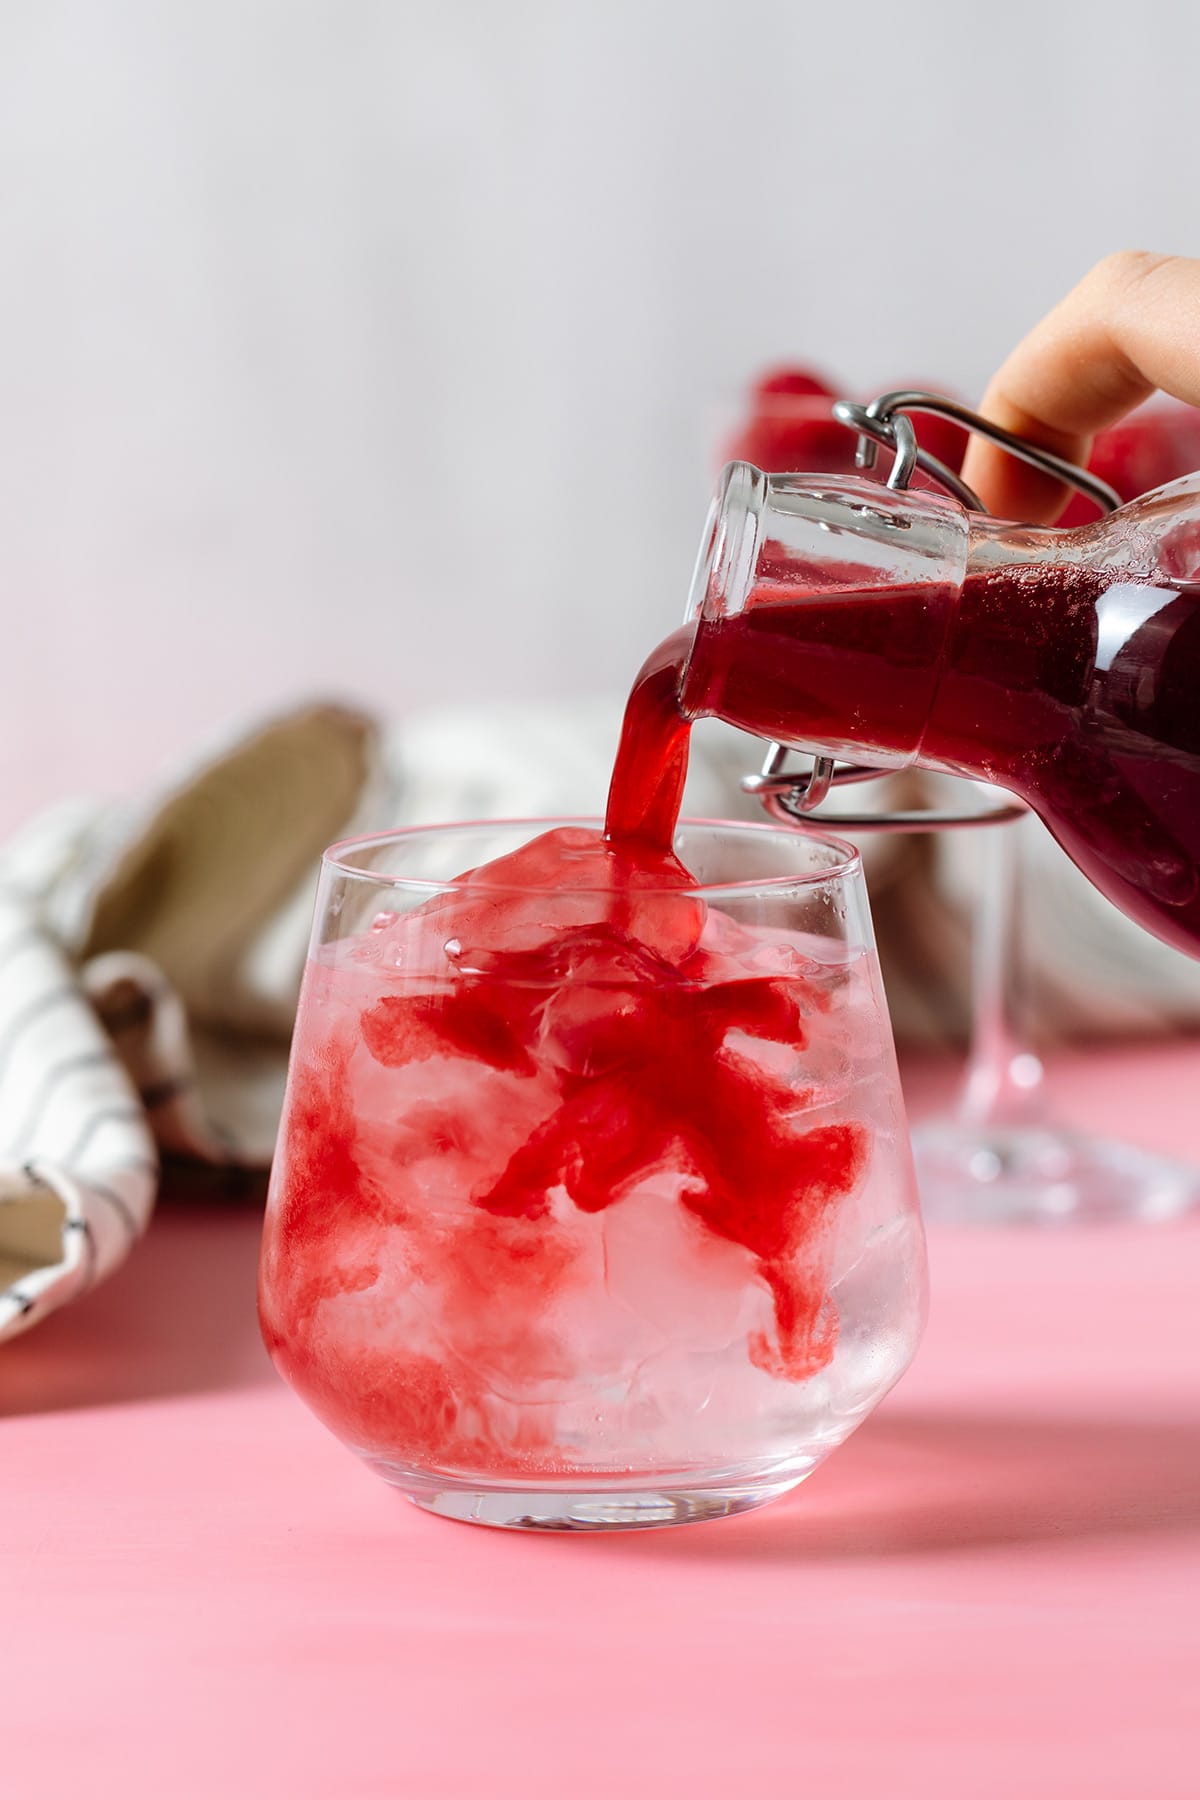 Raspberry syrup being poured into a glass of water on a pink background.